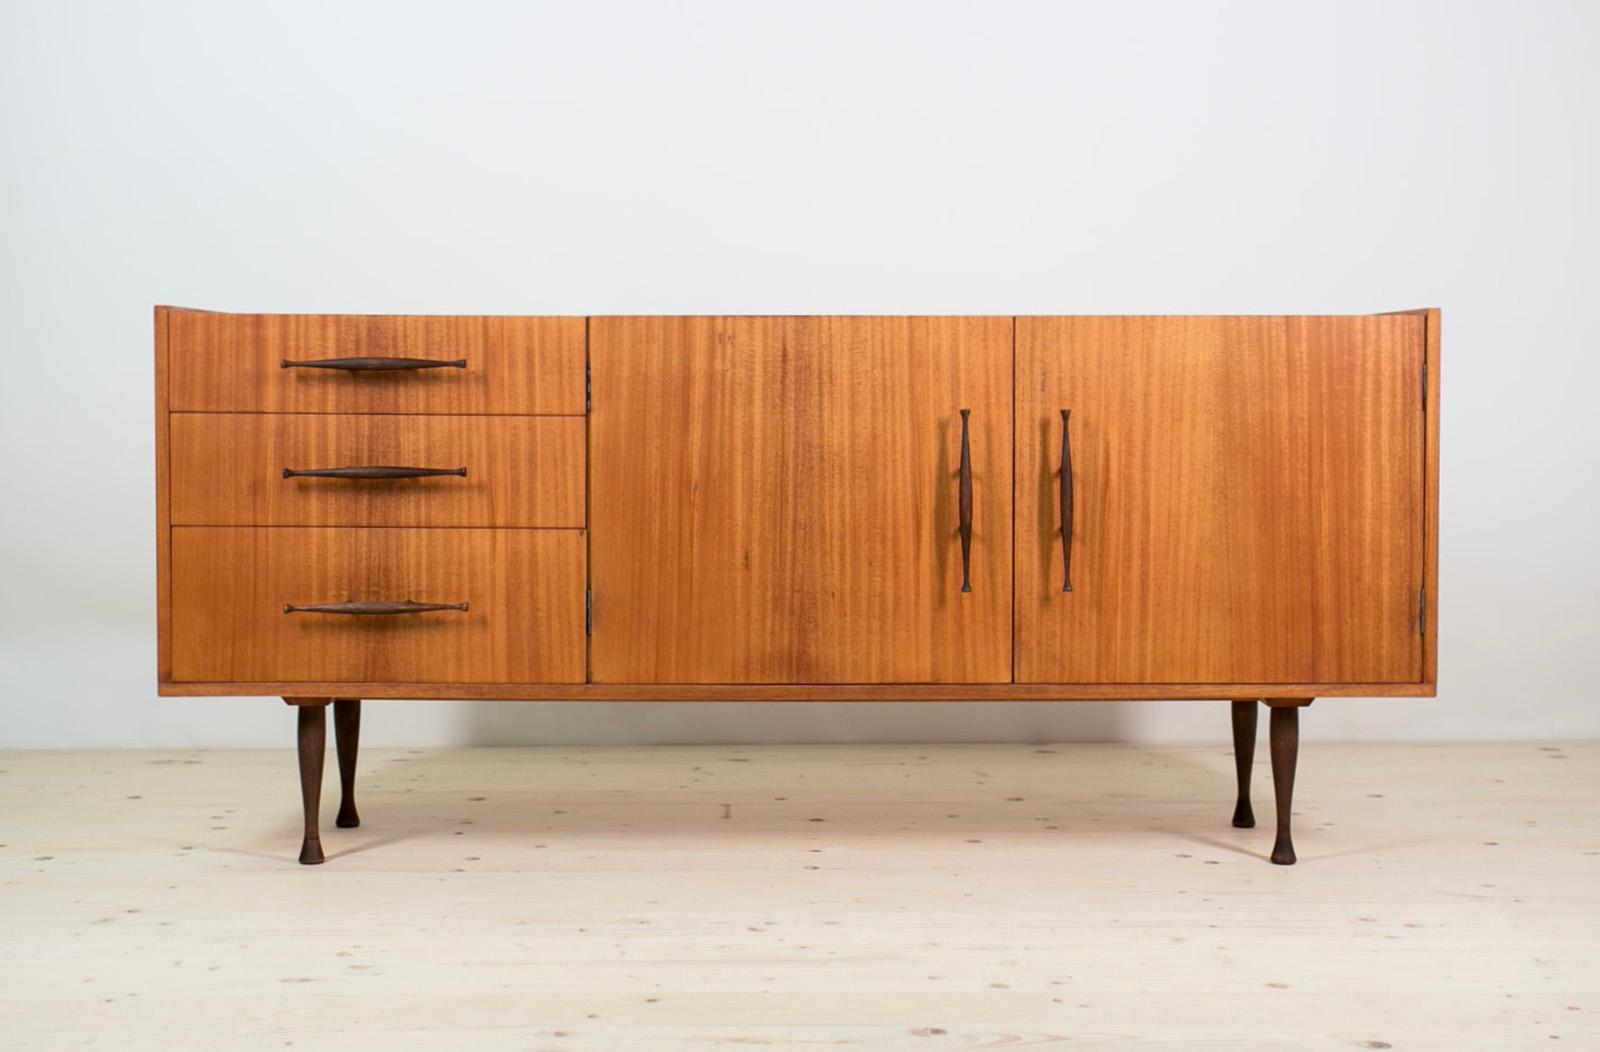 Introducing the sideboard designed by Marian Grabiński – an exquisite masterpiece that seamlessly blends the timeless elegance of Polish Design with the iconic flair of Mid-Century Modern aesthetics, transporting you straight into the chic ambiance